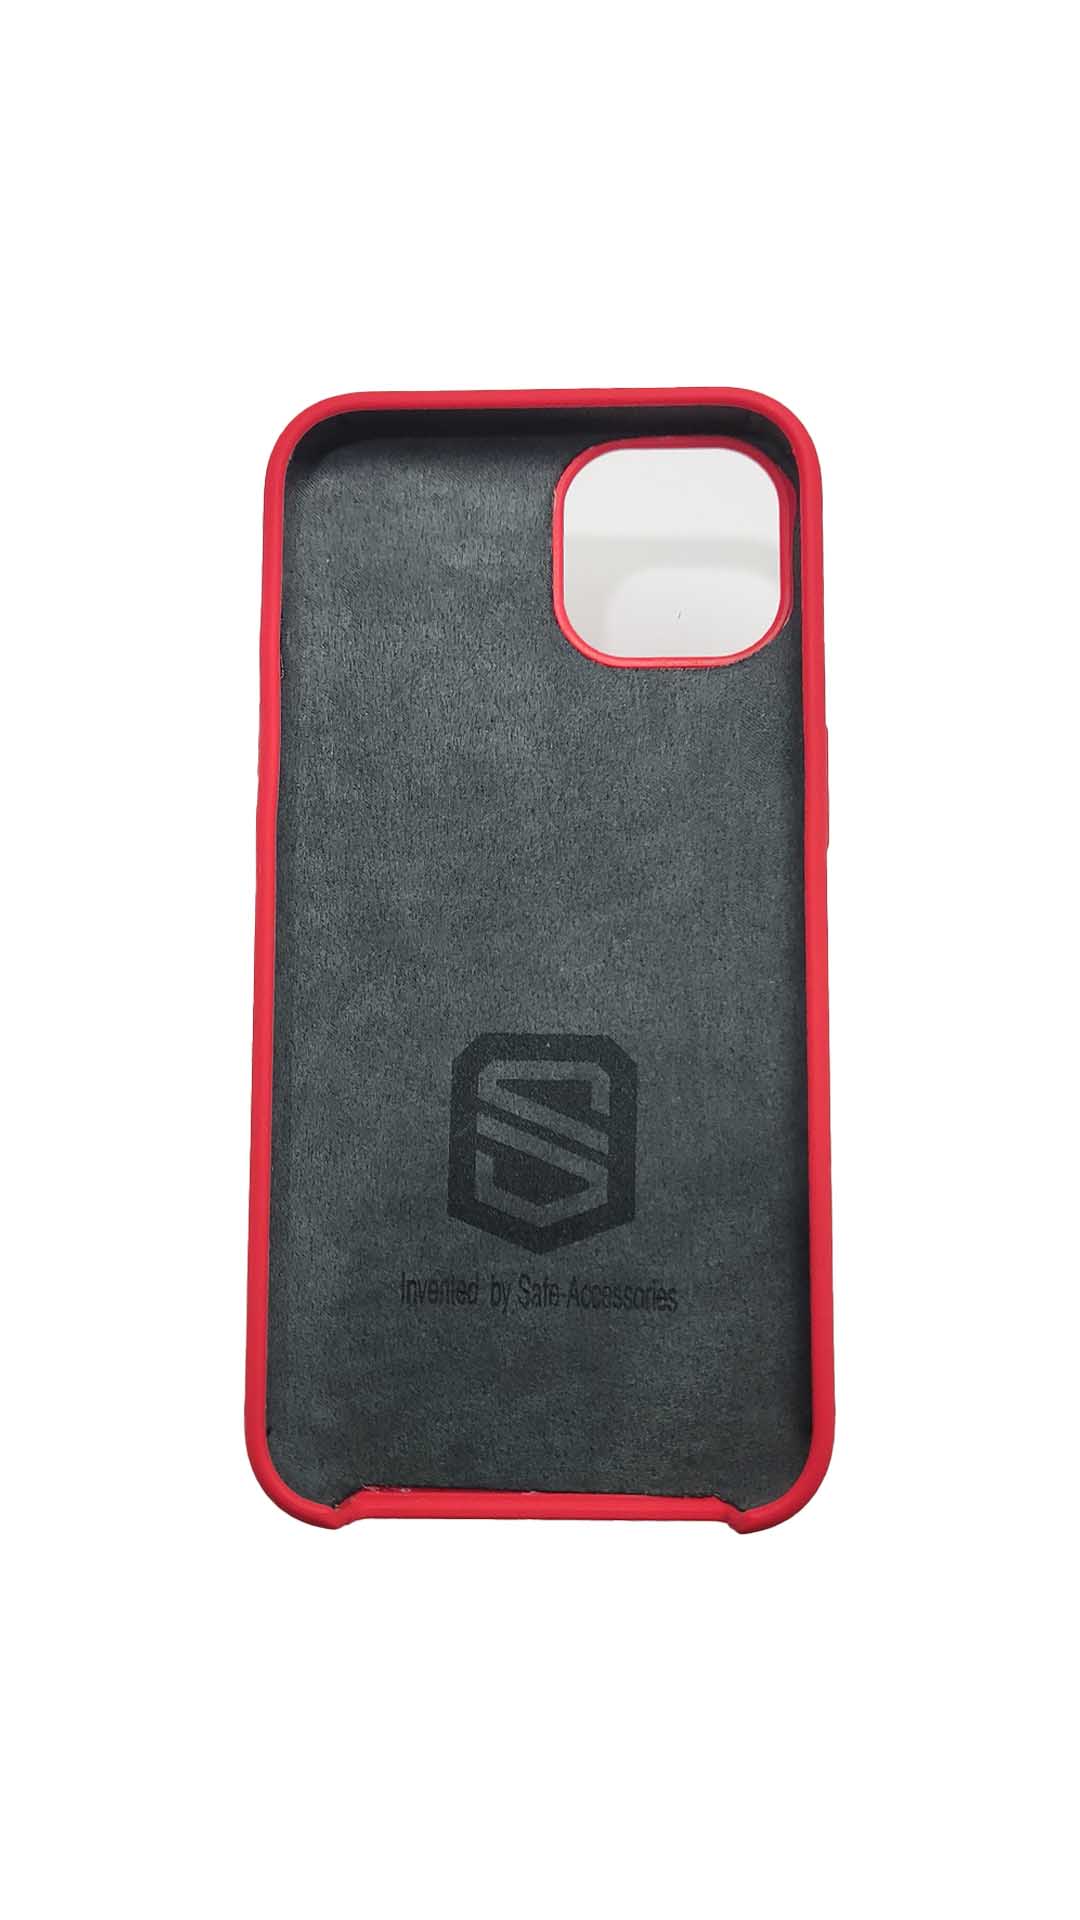 iPhone 12 Safe-Case with Anti-radiation EMF protection